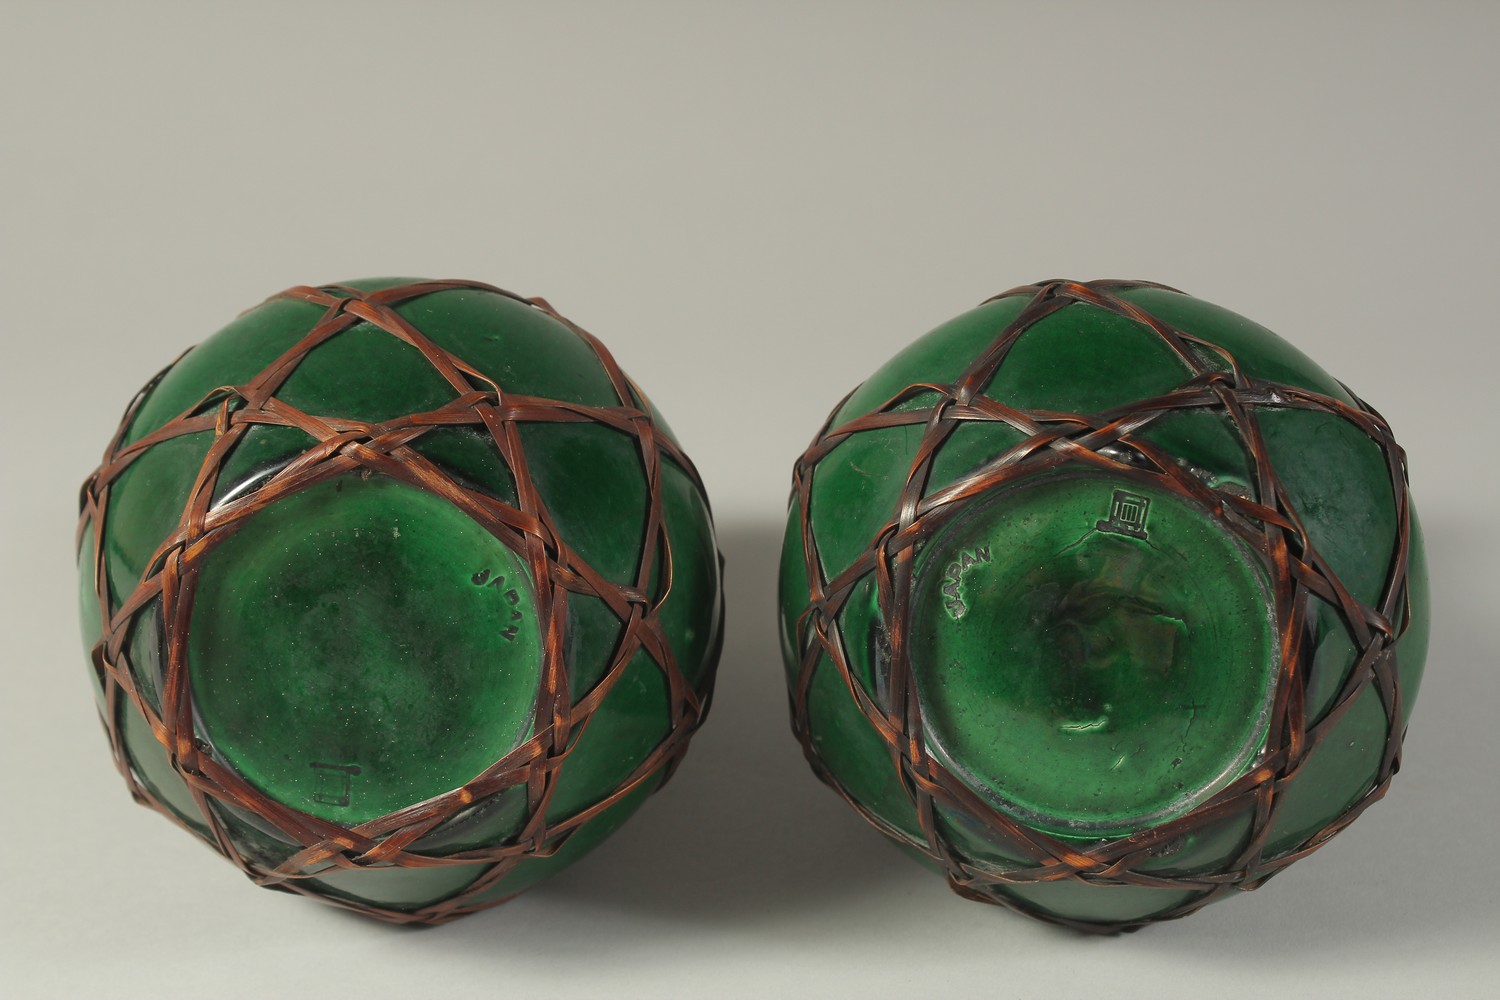 A PAIR OF JAPANESE AWAJI WARE GREEN GLAZED PORCELAIN VASES, with woven bamboo overlay, each with - Image 4 of 4